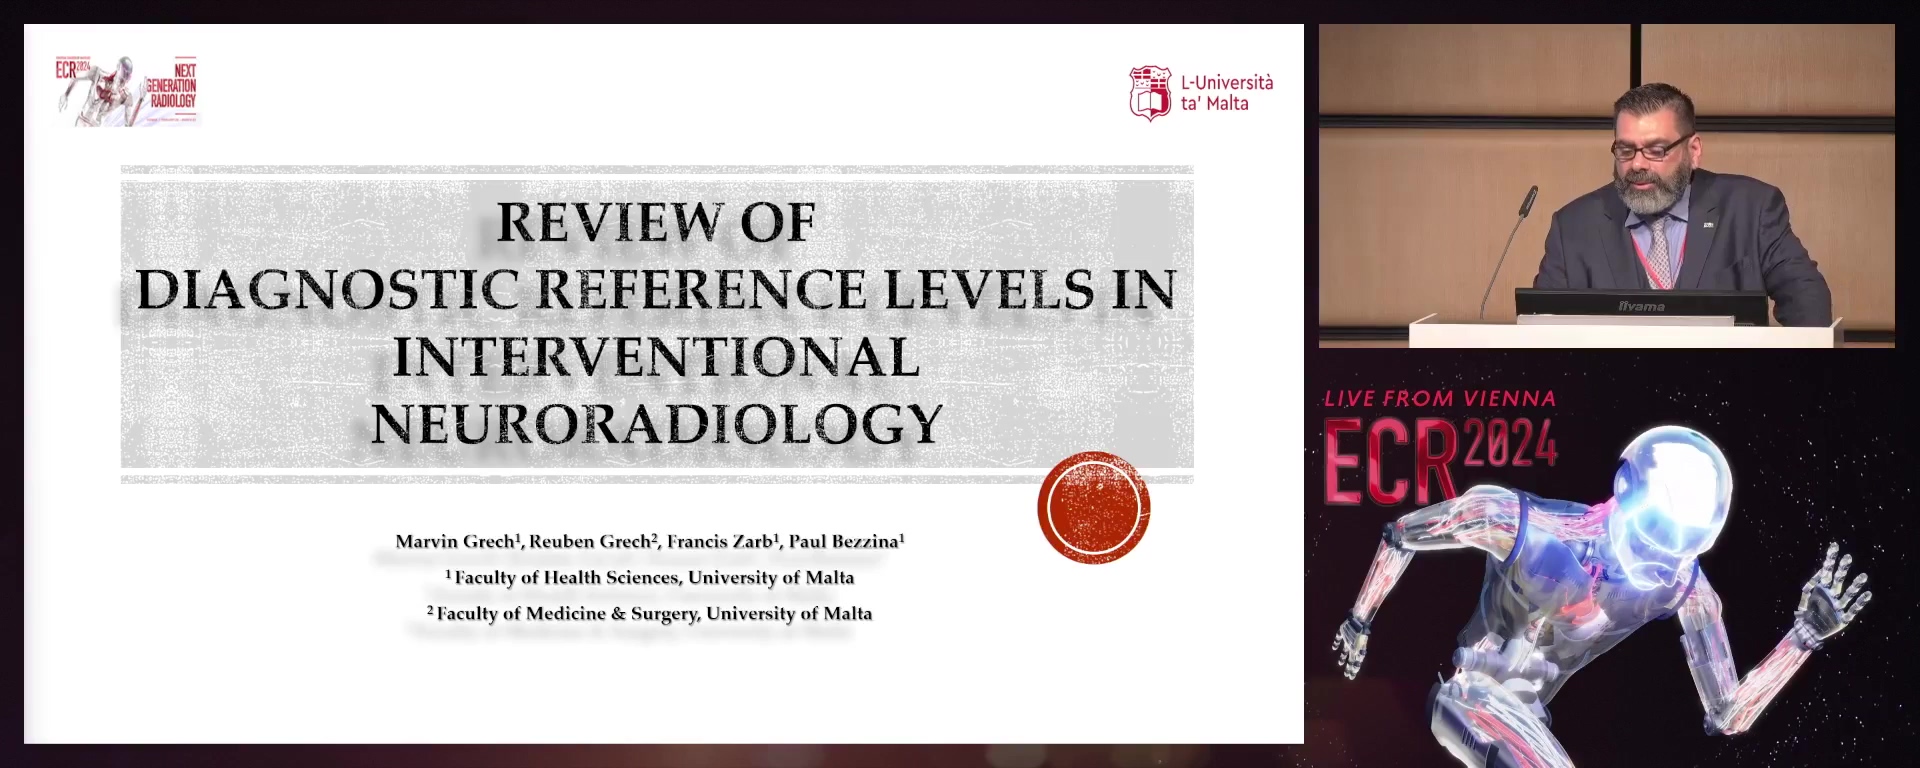 Review of diagnostic reference levels (DRLs) in interventional neuroradiology (INR)